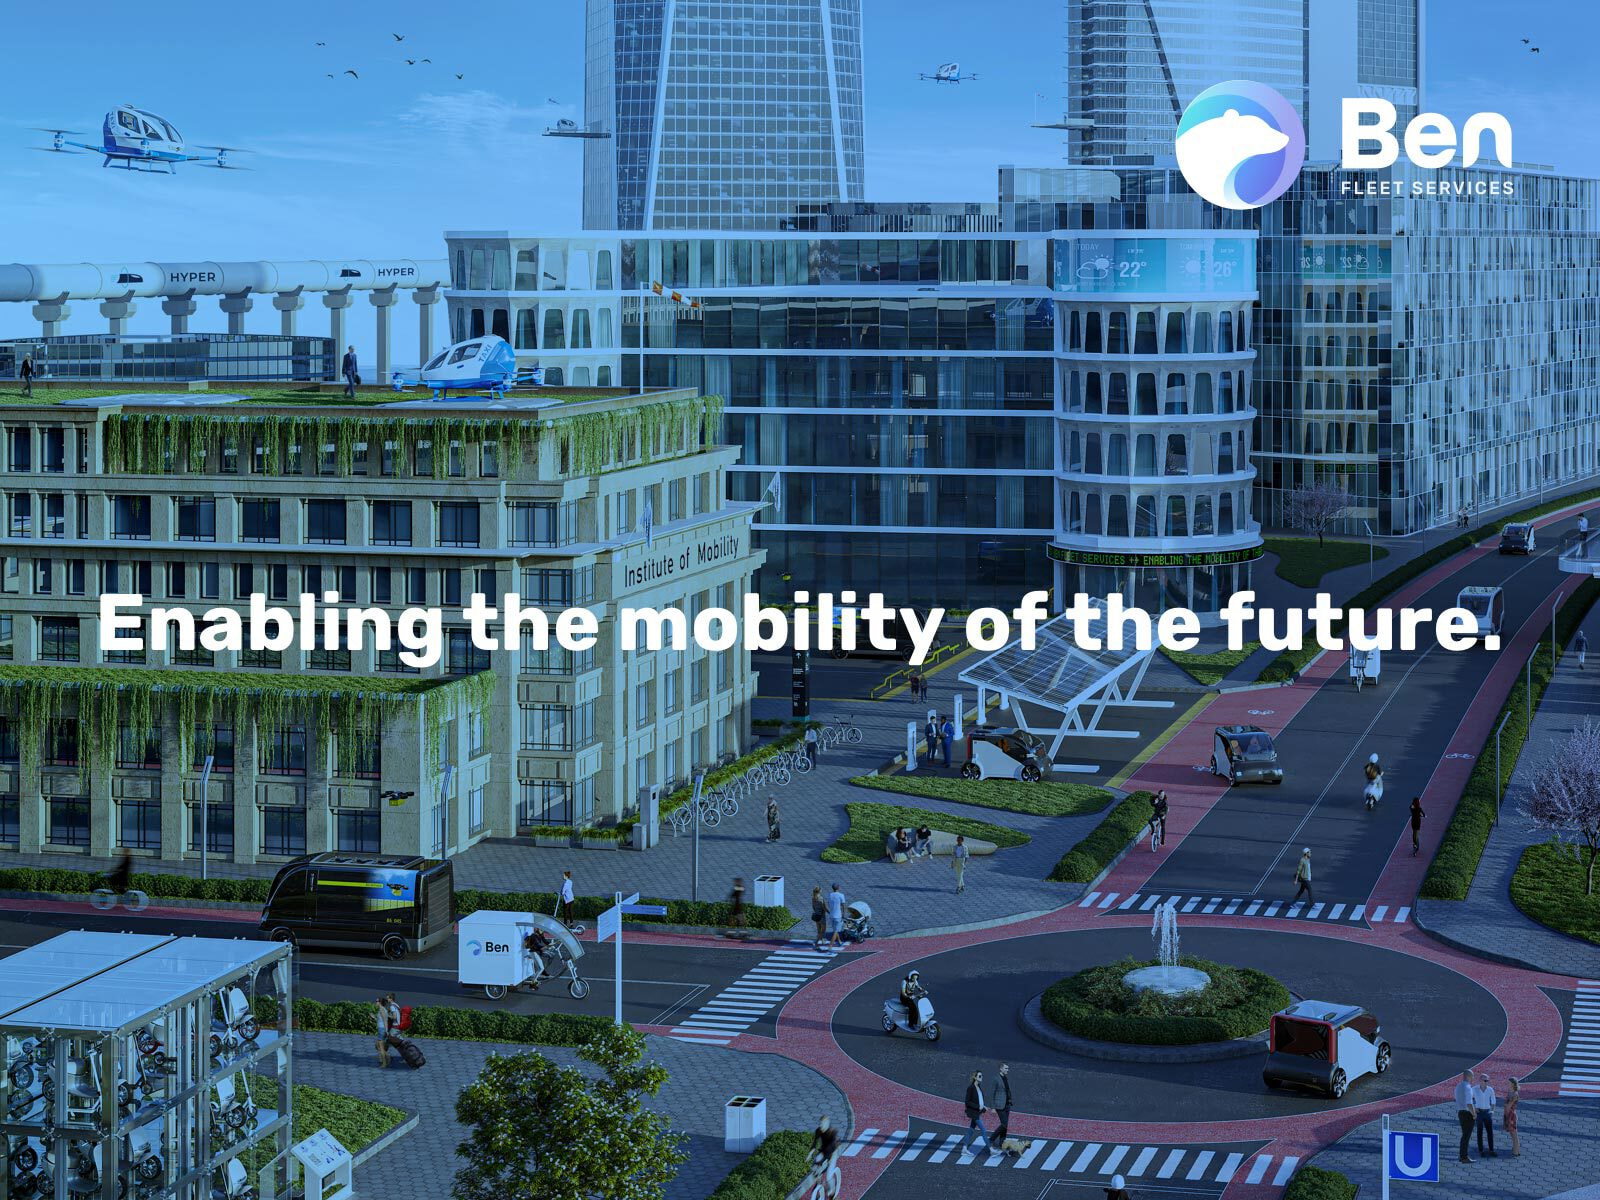 Enabling the mobility of the future.